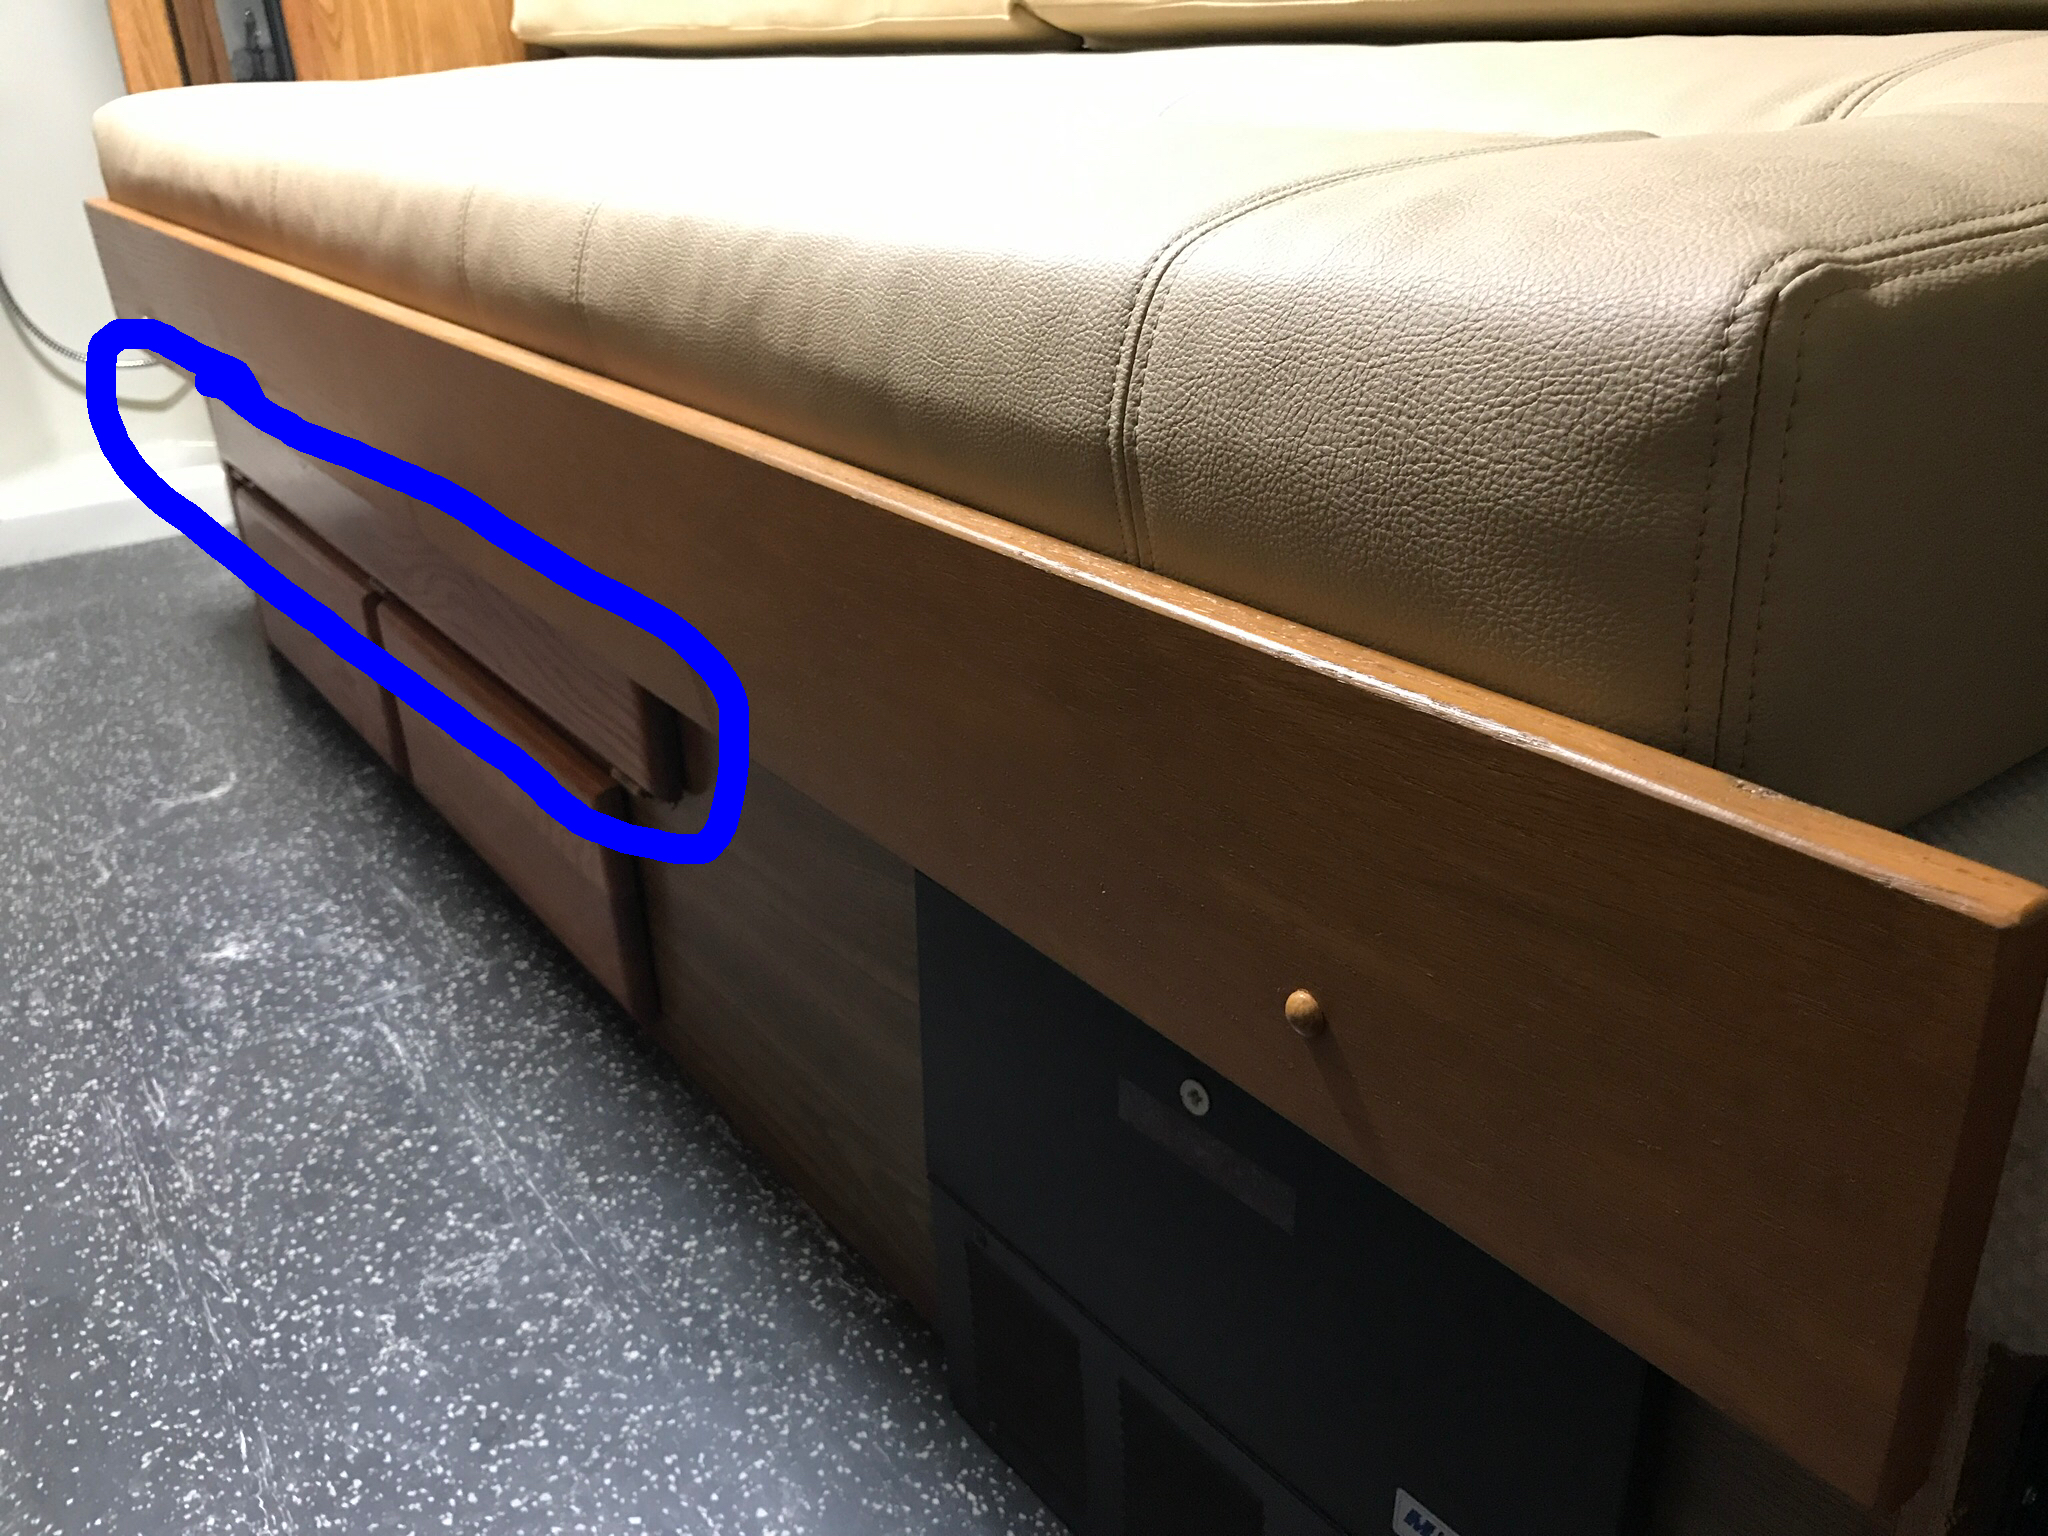 The table top storage compartment is circled in blue.